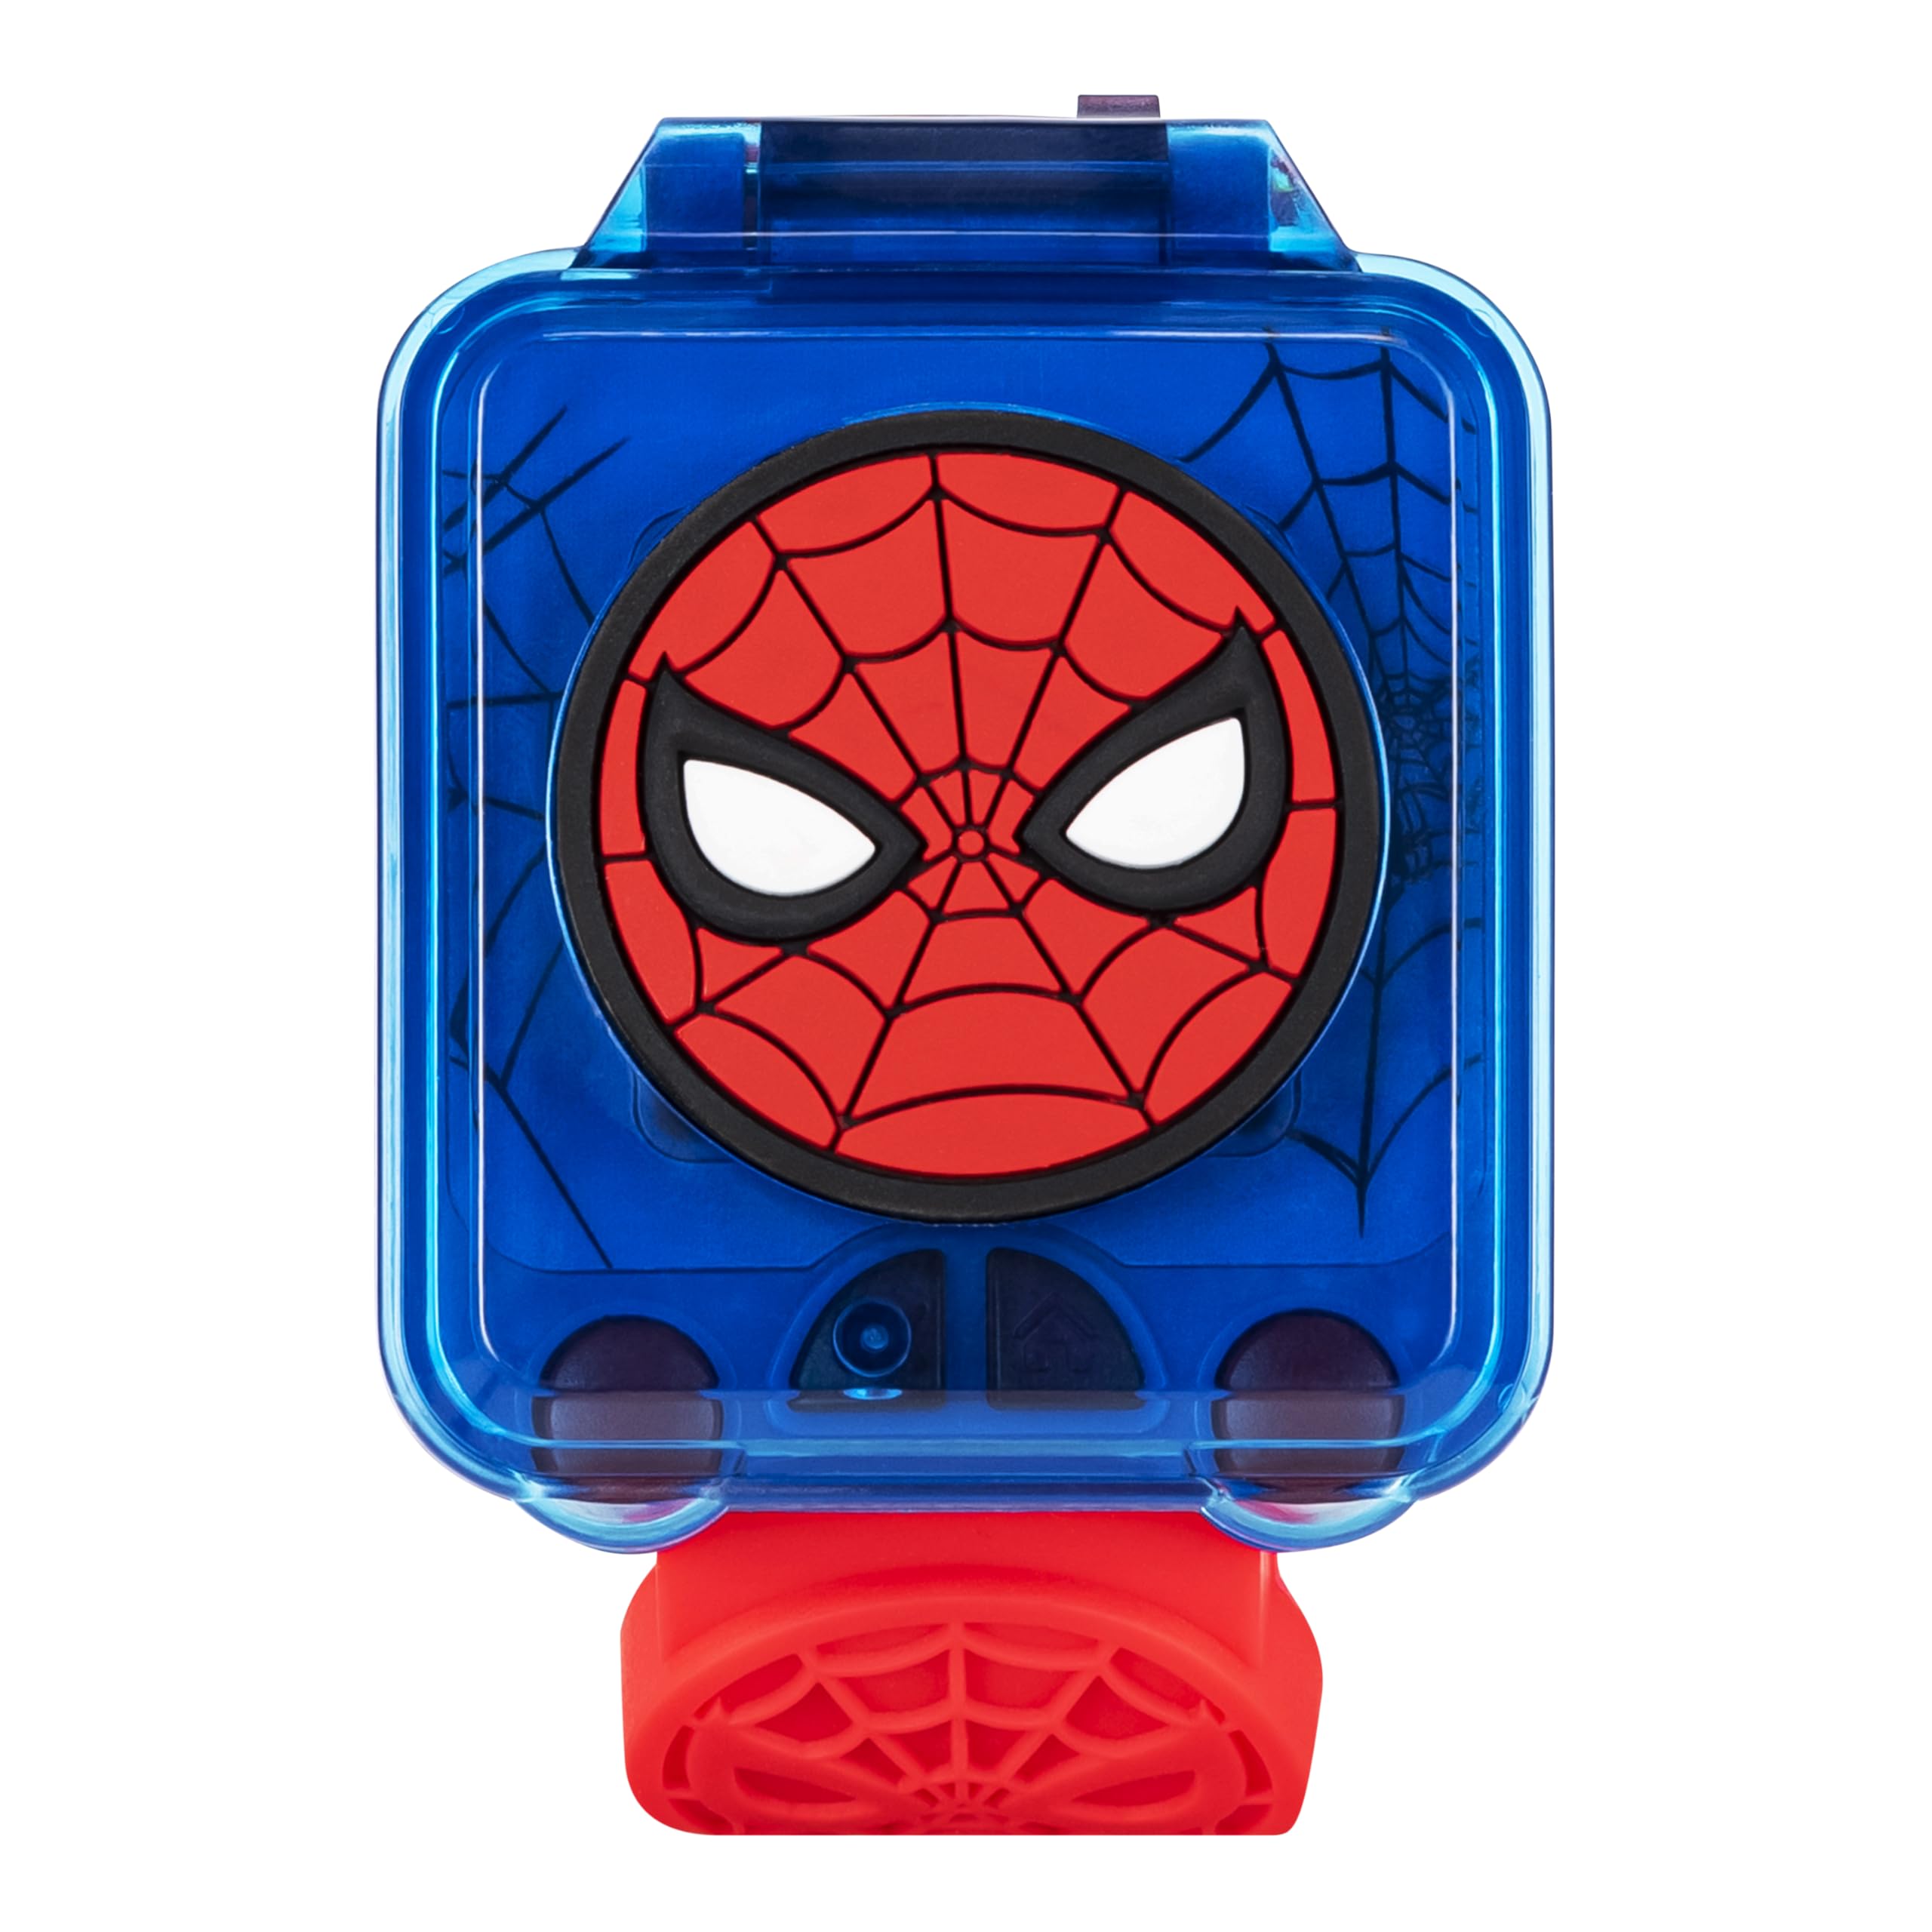 Accutime Marvel Spider-Man Educational Learning Digital Blue Watch for Boys, Toddlers, Kids with Red Strap - Includes Timer, Stopwatch, Alarm, Games and More! (Model: SPD4753AZ)